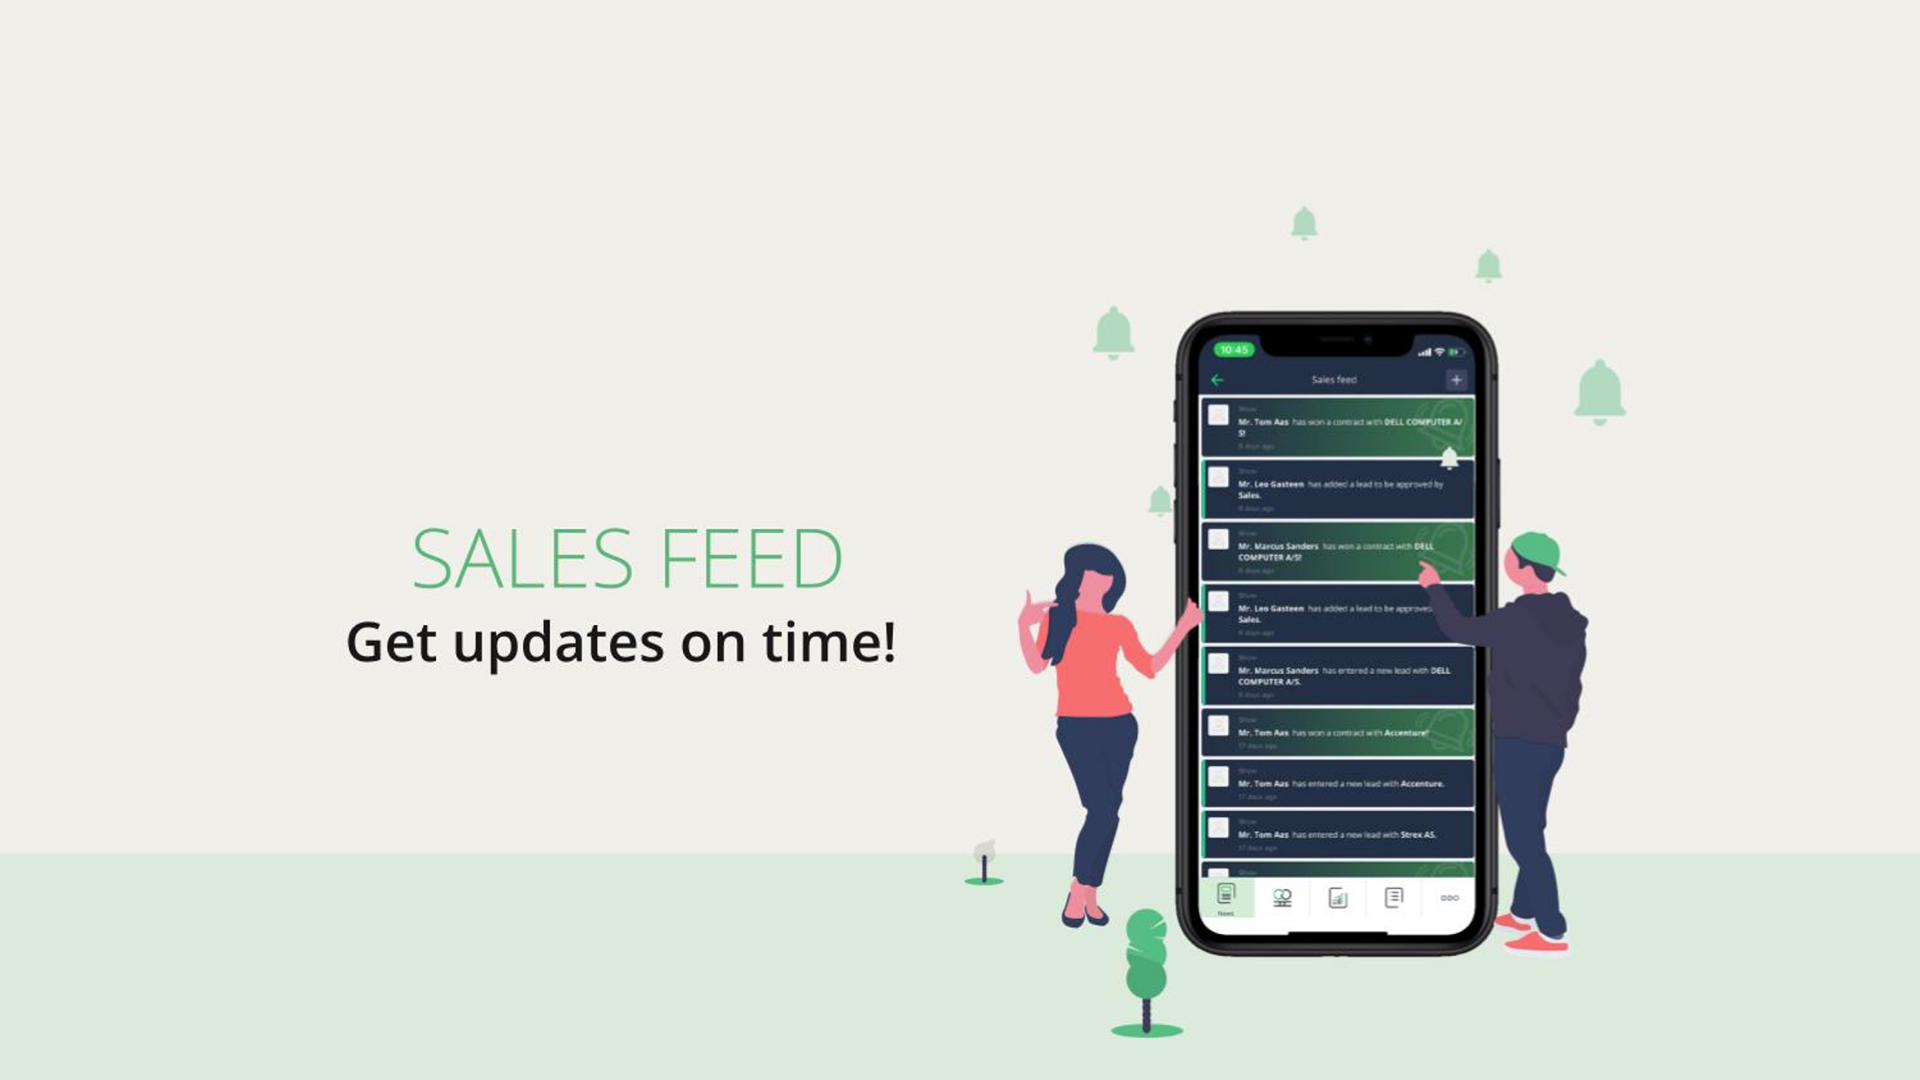 Get updates from the sales team